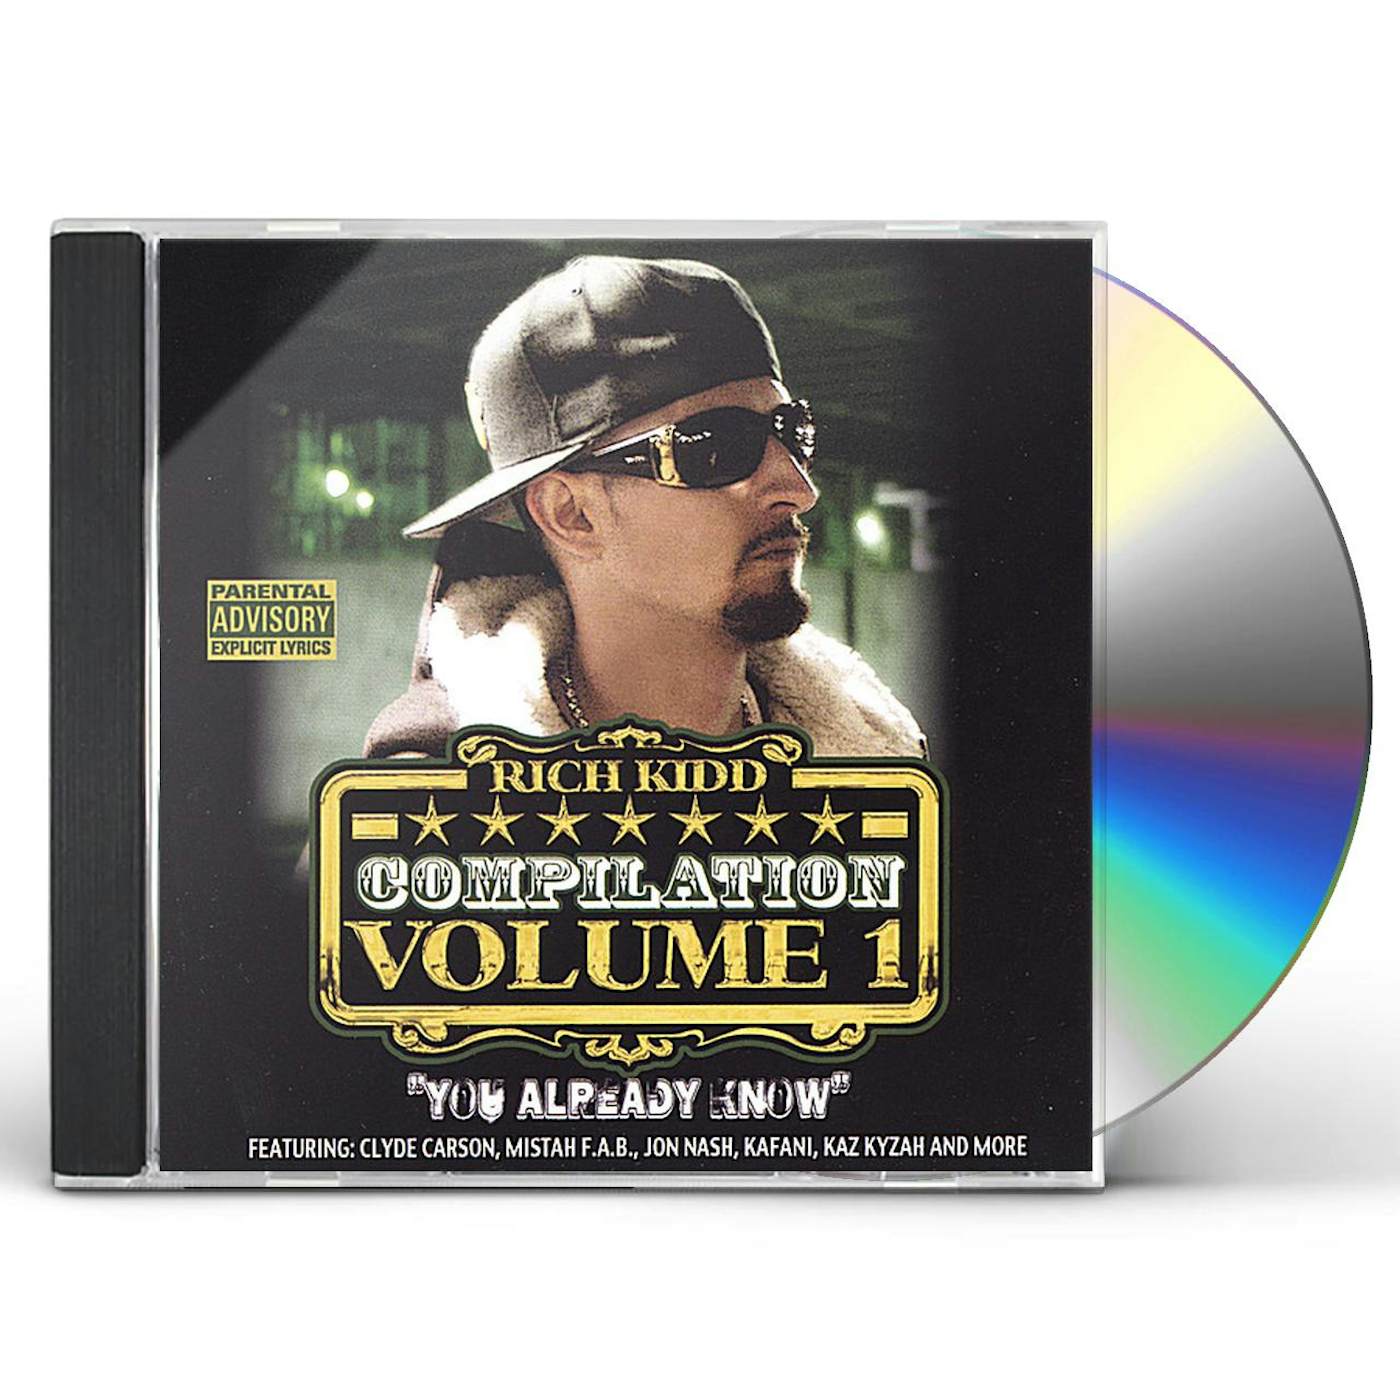 Rich Kidd COMPILATON: YOU ALREADY KNOW 1 CD